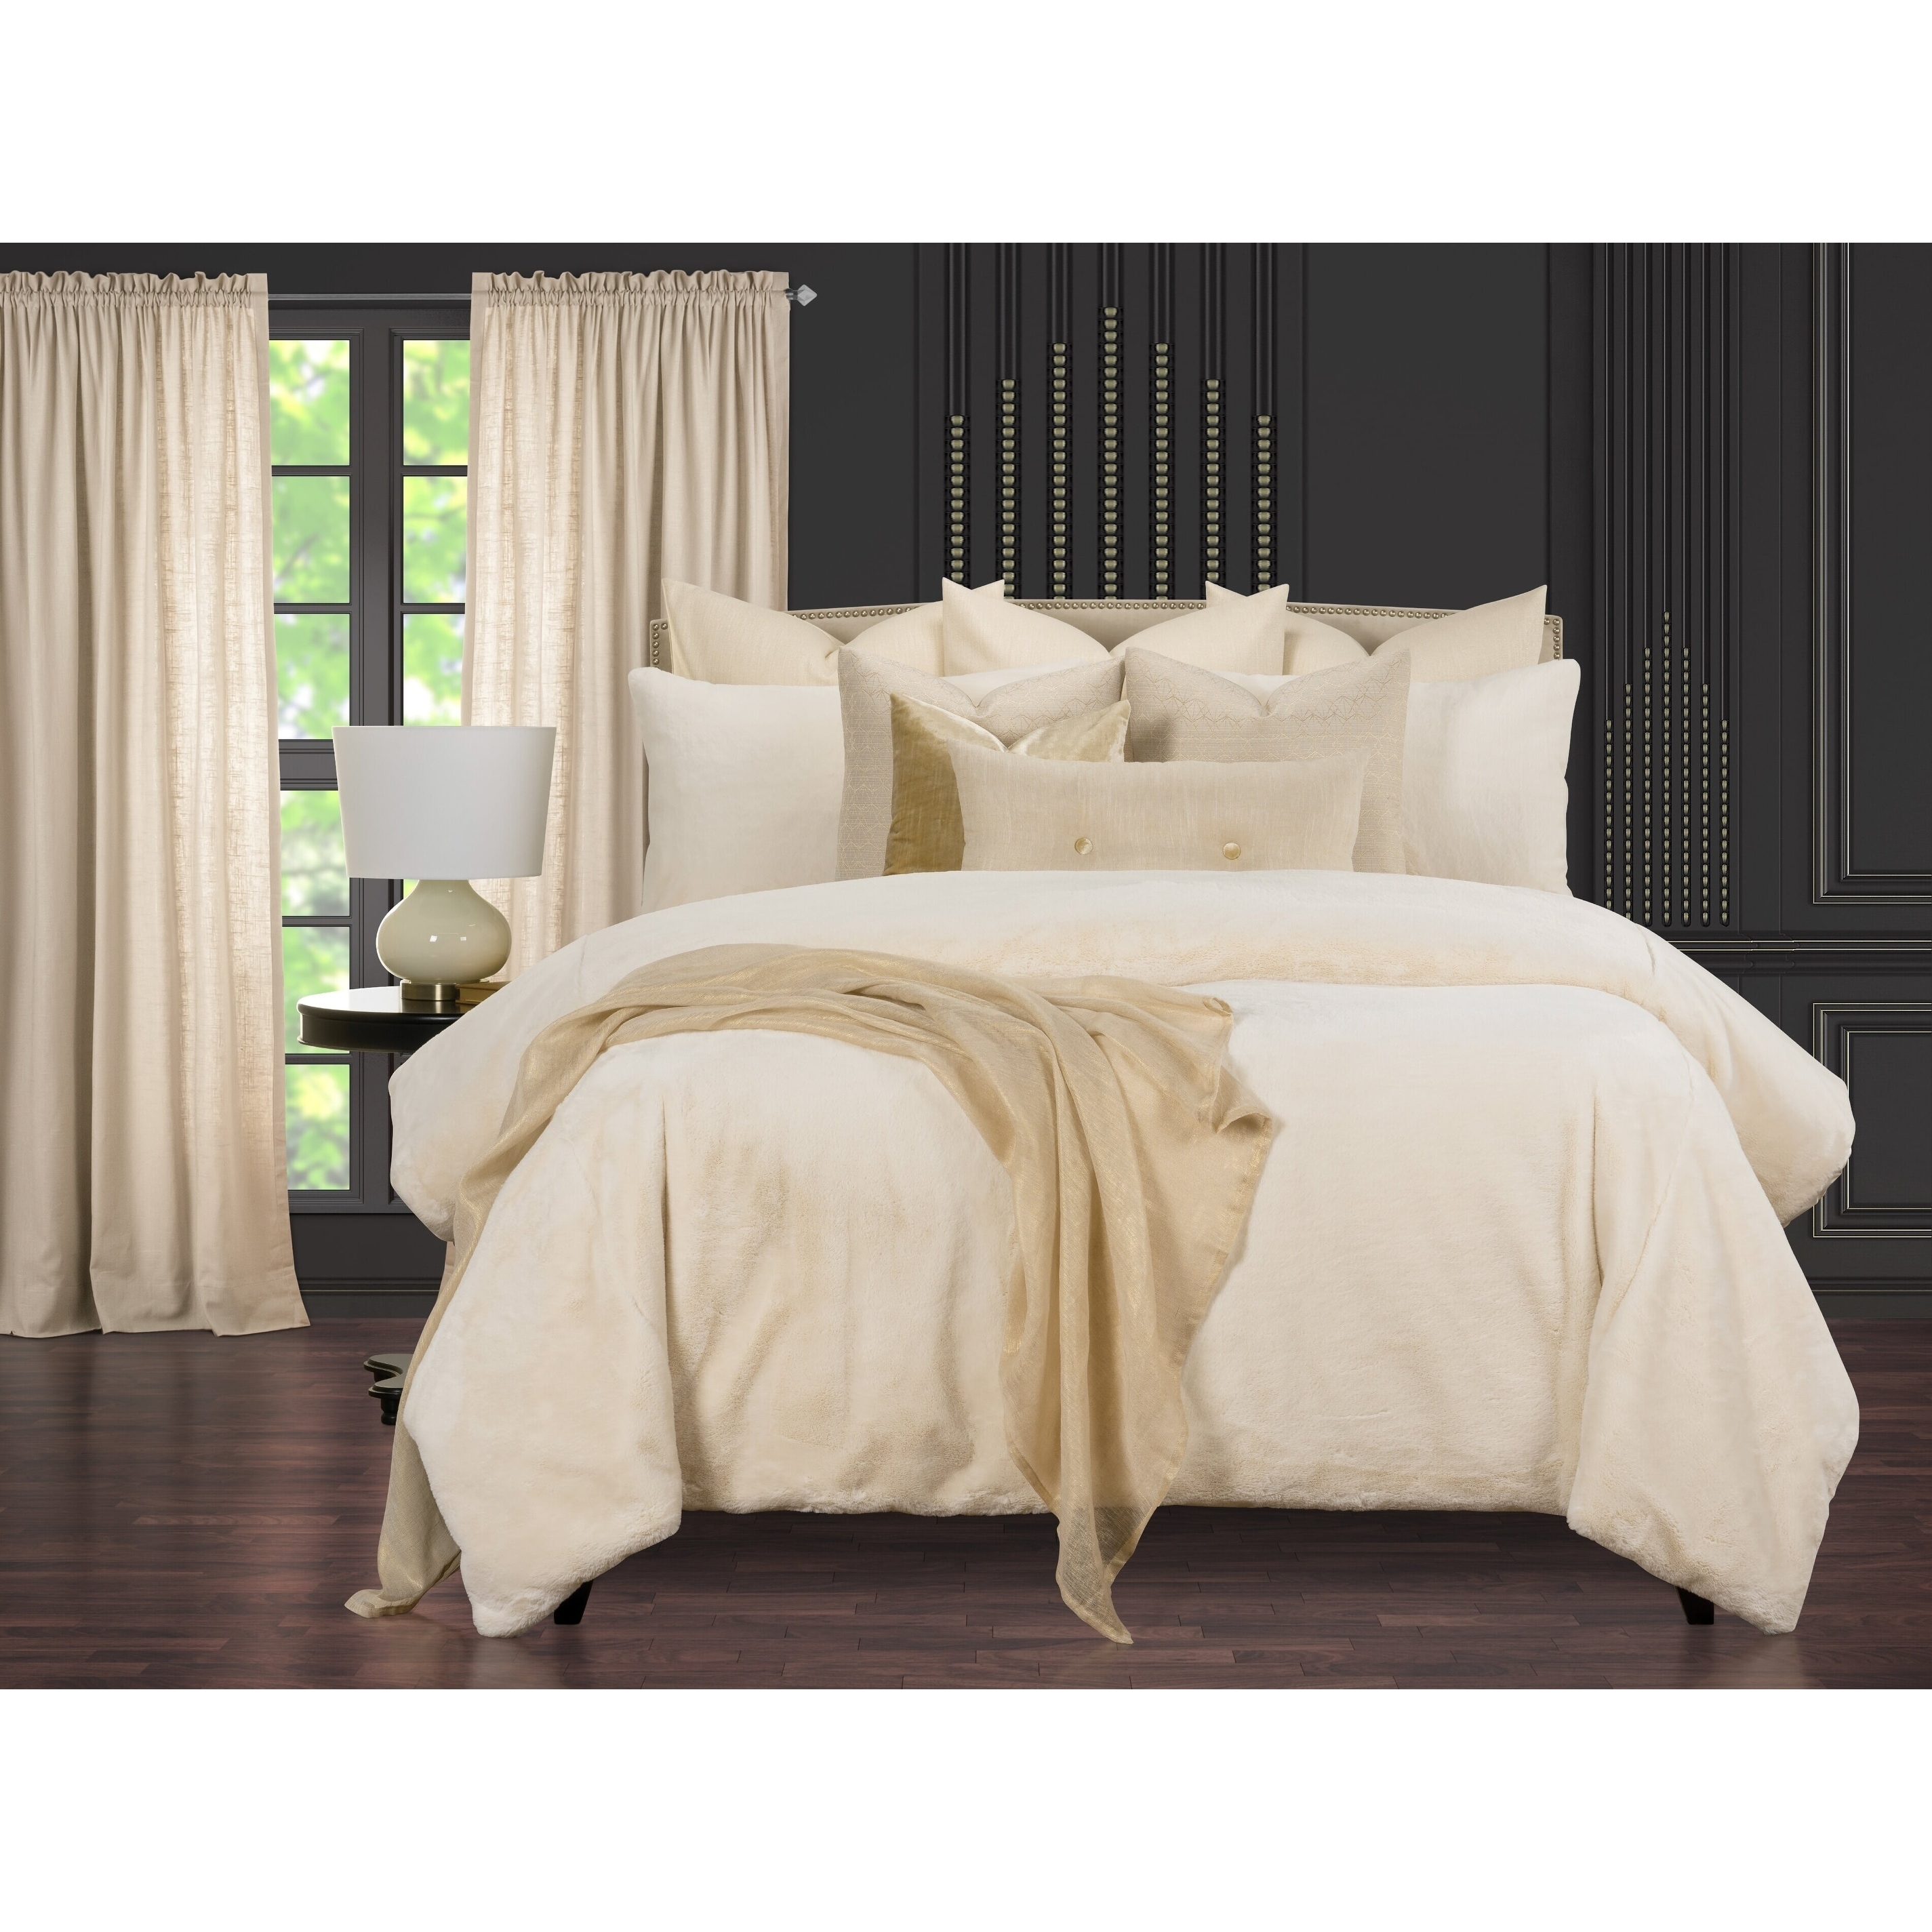 Room Service Luxurious Supreme Duvet Cover and Insert Set - Bed